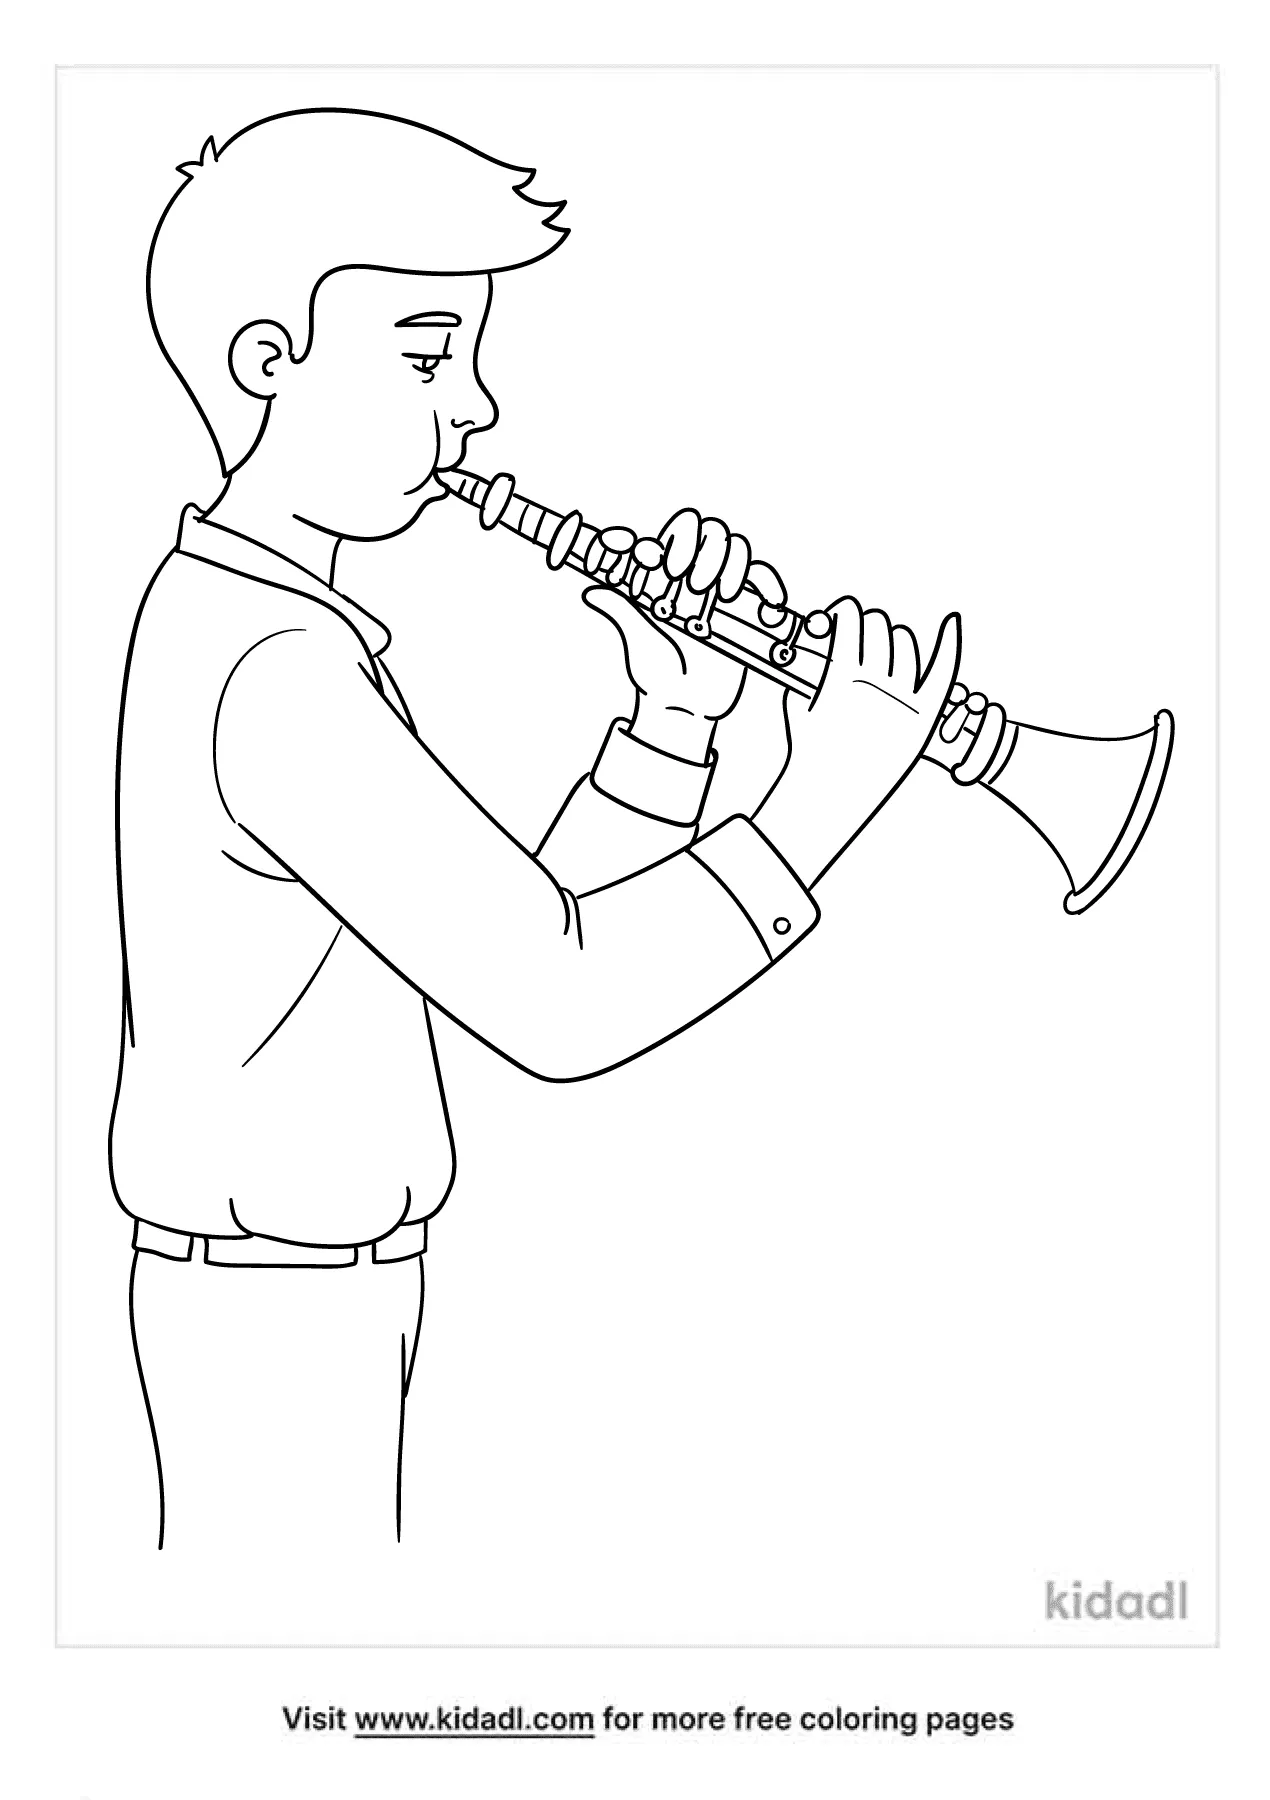 Free Clarinet Coloring Page | Coloring Page Printables | Kidadl